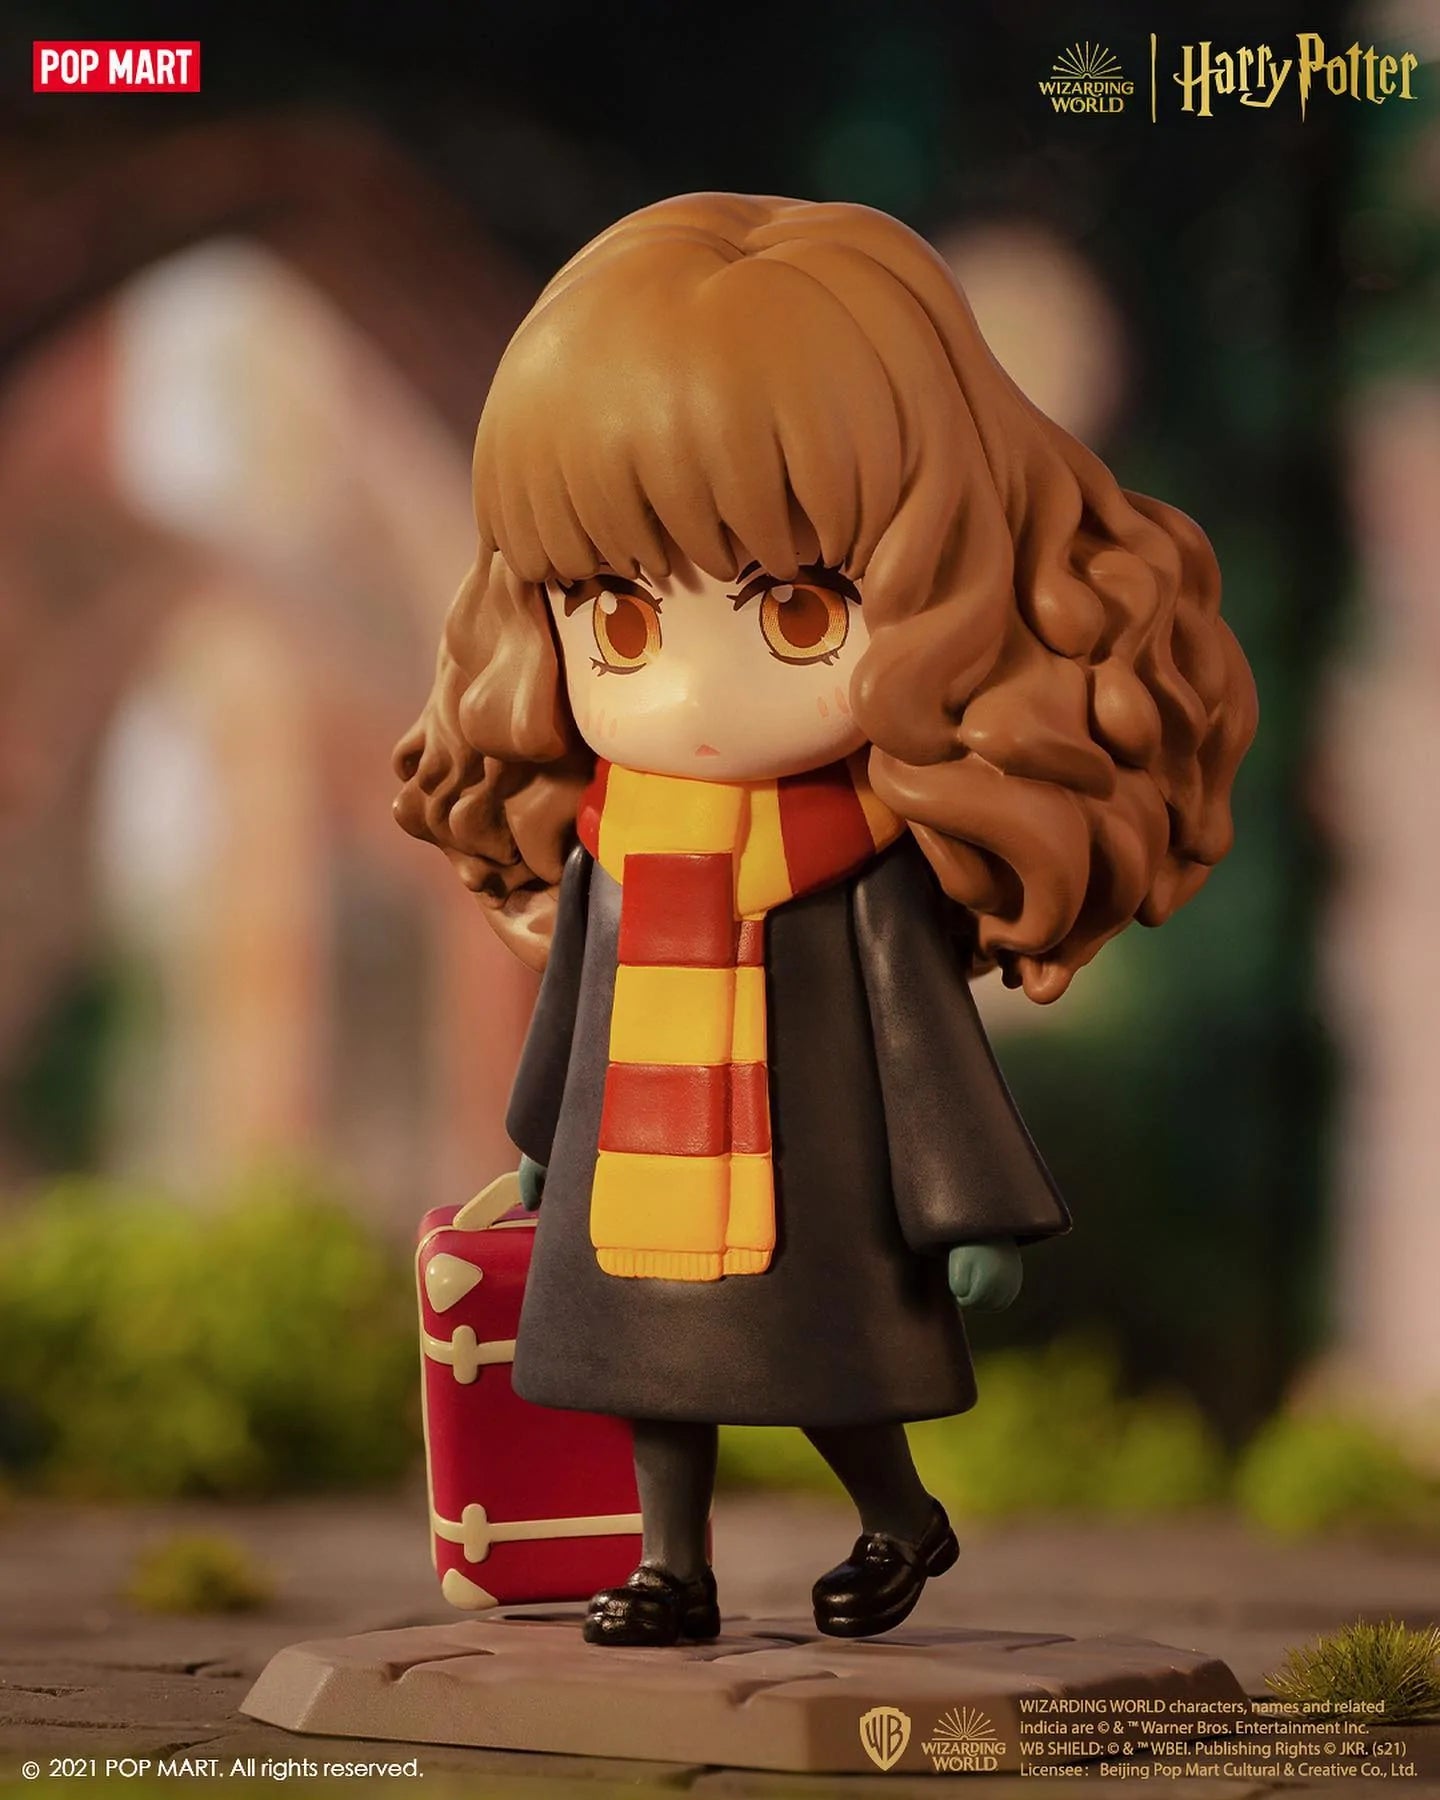 Pop Mart Harry Potter and the Sorcerer's Stone Series